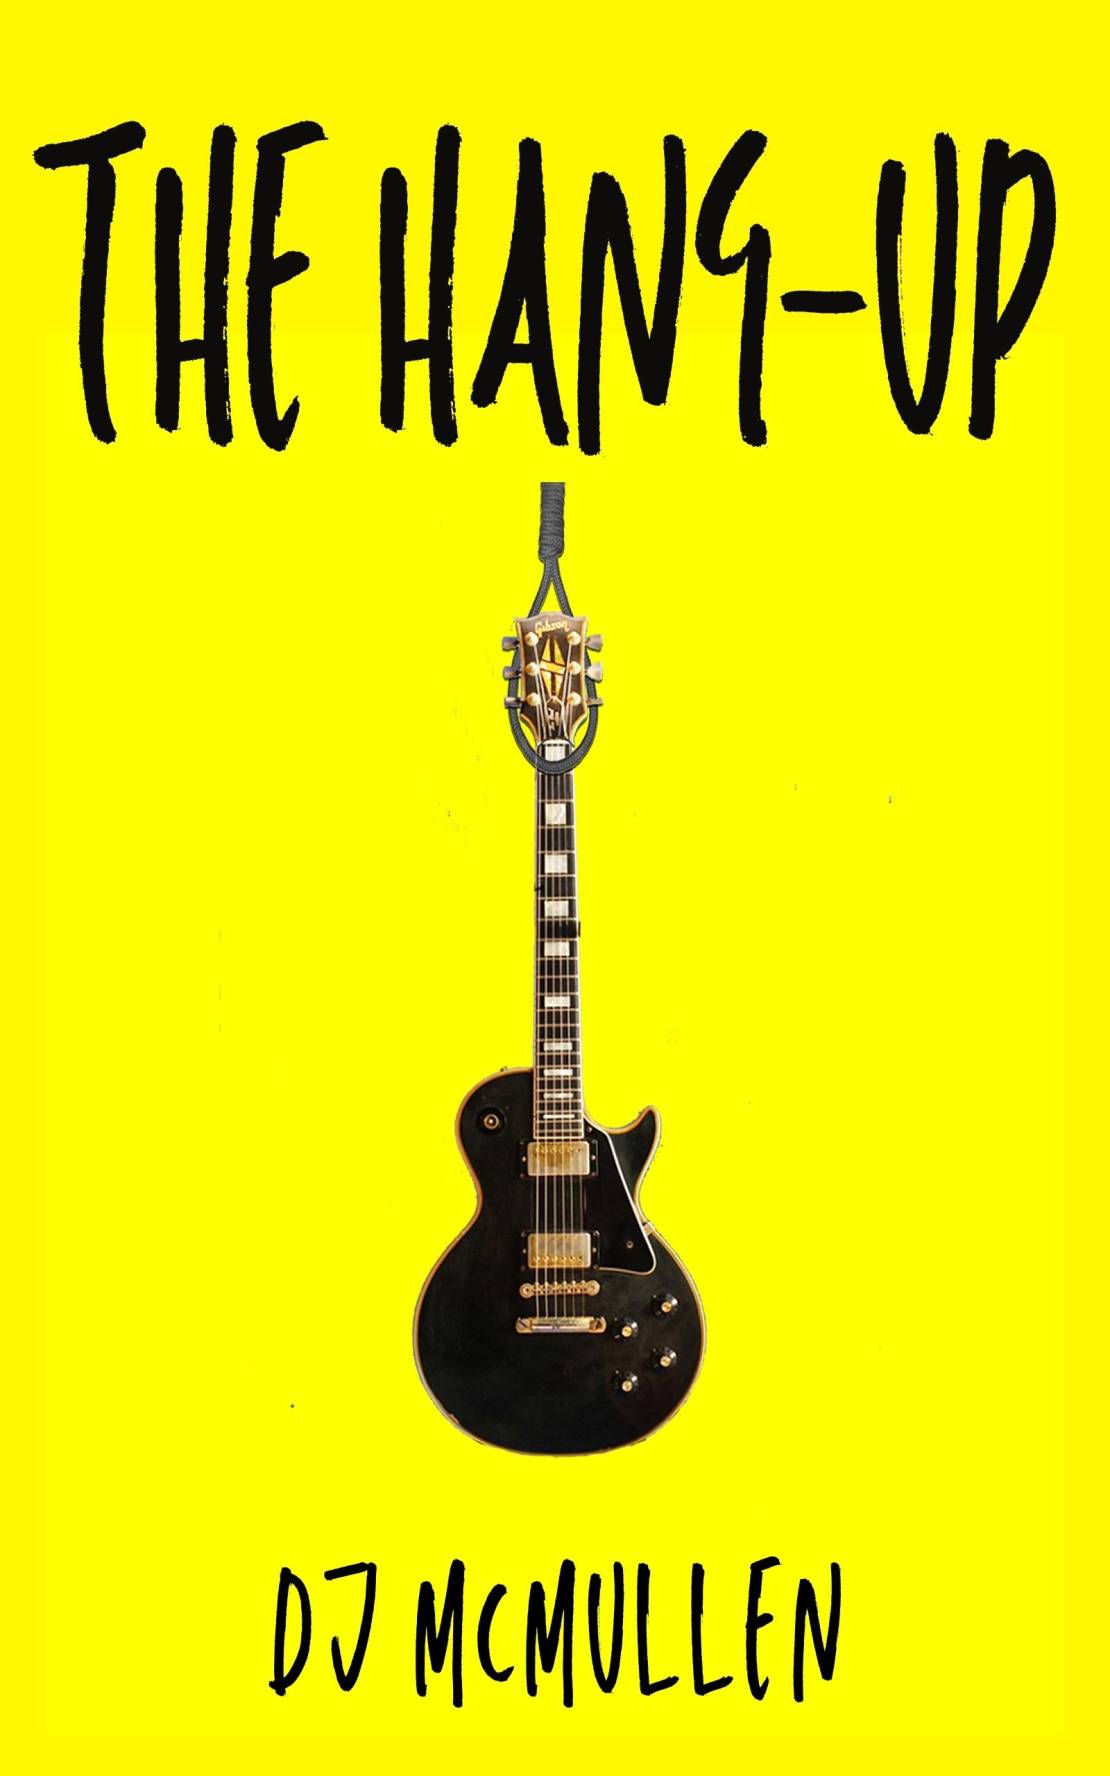 Tunedly Musician, David McMullen Releases New Novel, ‘The Hang-Up’